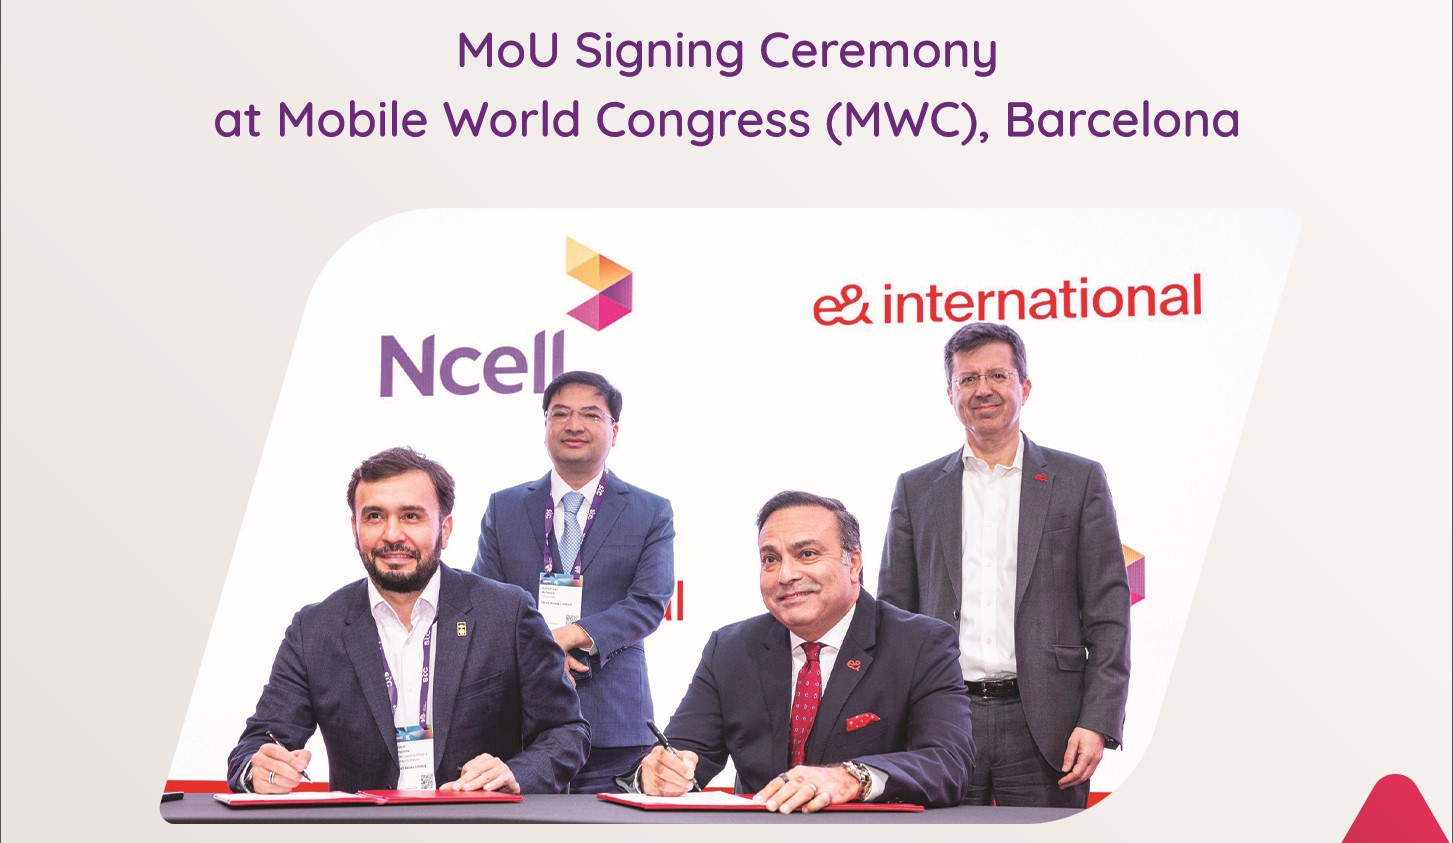 Ncell and e& international sign MoU to deliver superior digital services and customer experiences